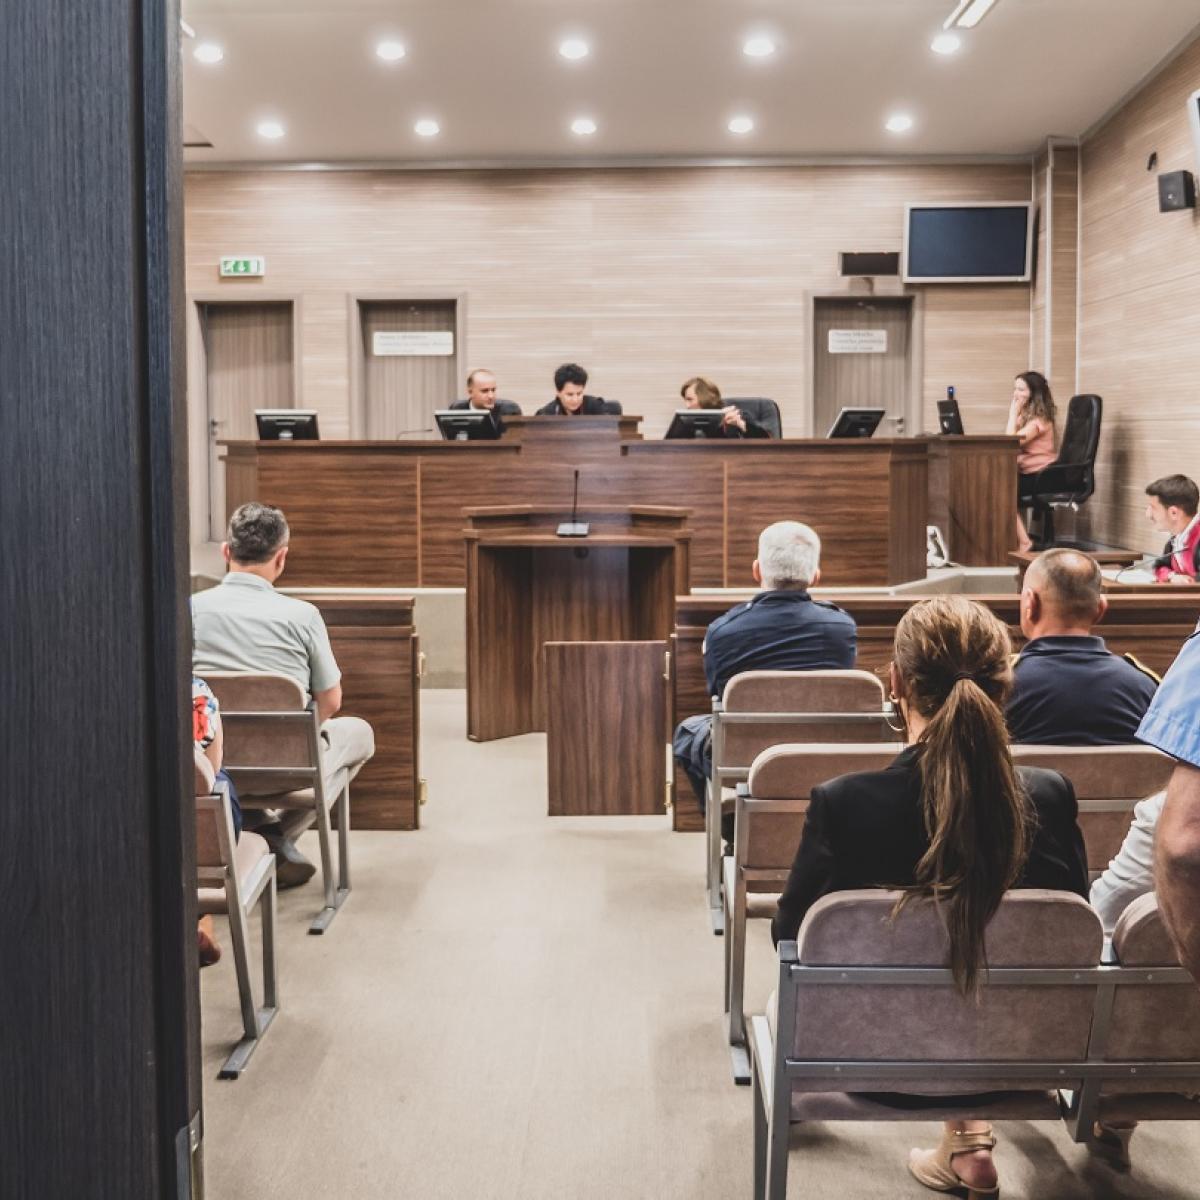 View of a courtroom from the entry doors